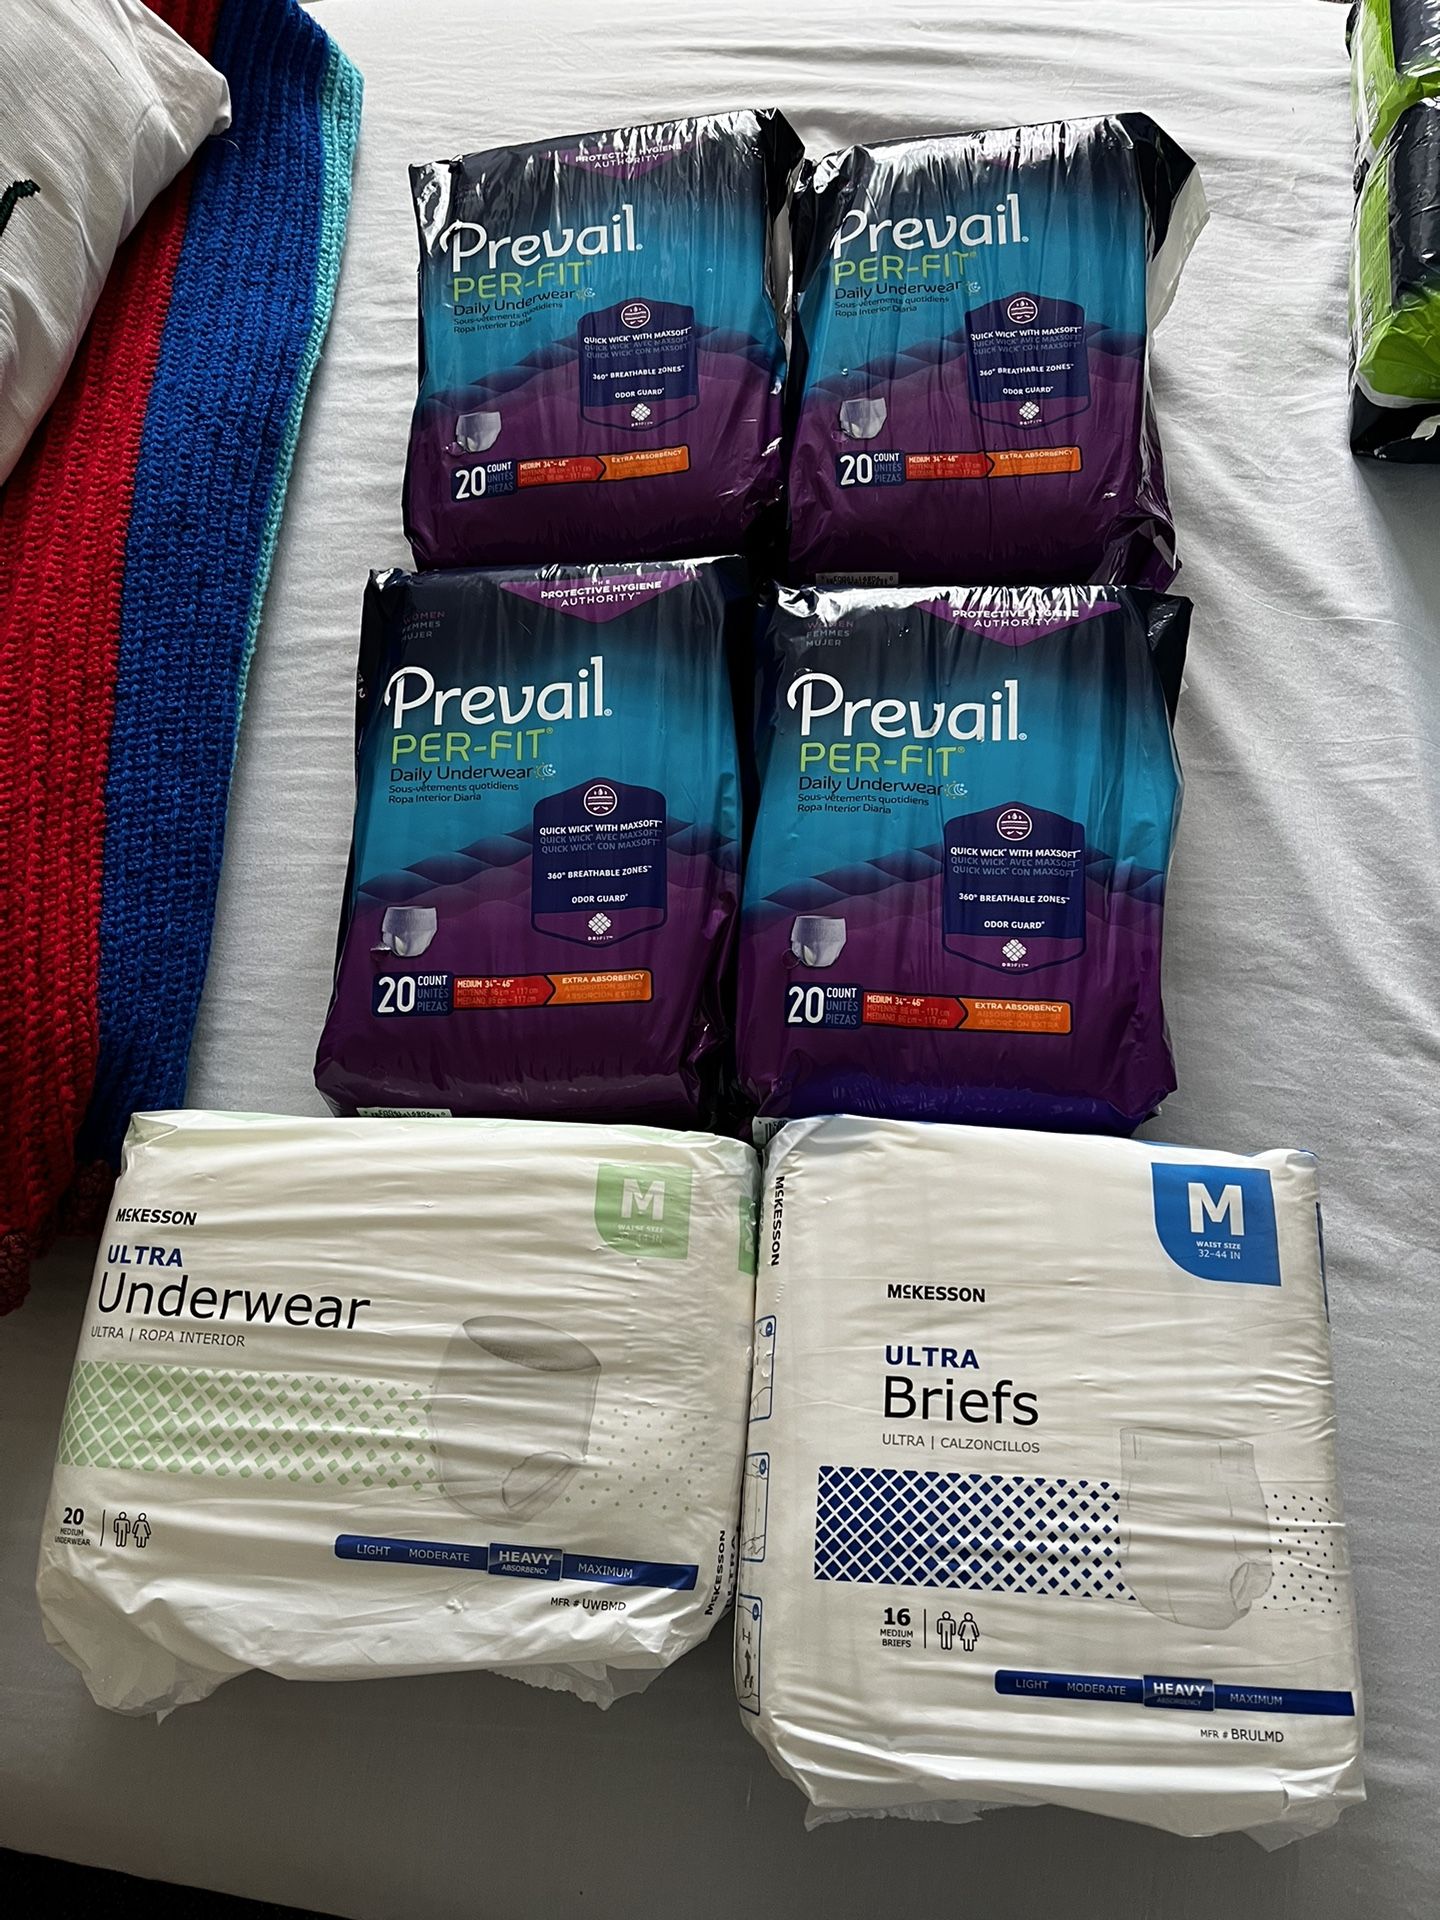 Adult Diapers And Bed Liners